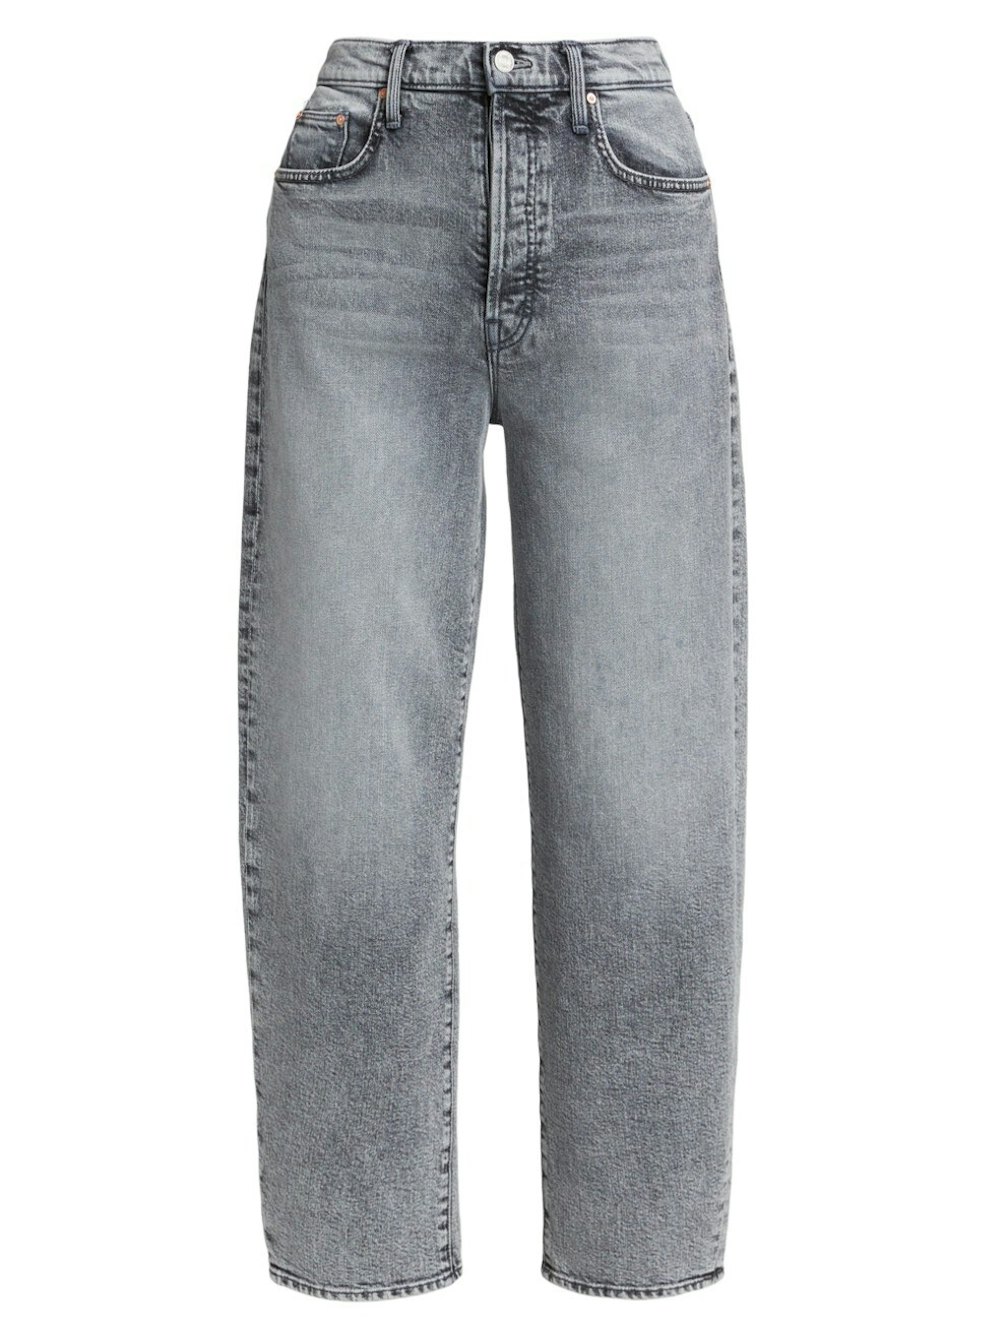 The Curbside High Rise Balloon Jeans